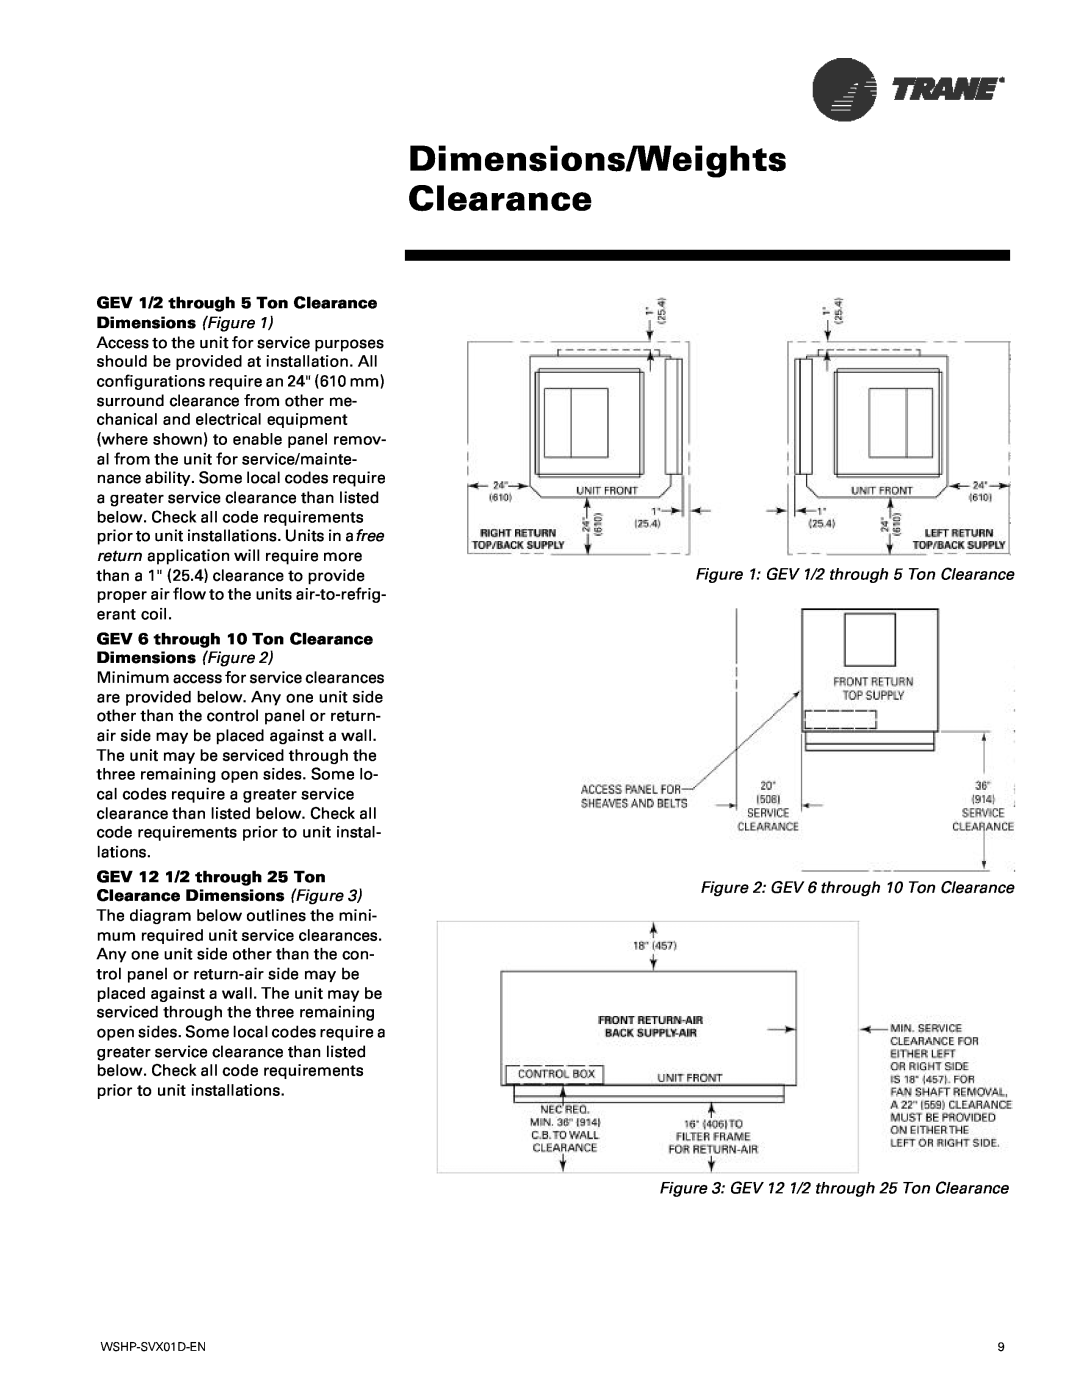 Trane GEH manual Dimensions/Weights Clearance, GEV 1/2 through 5 Ton Clearance Dimensions Figure 